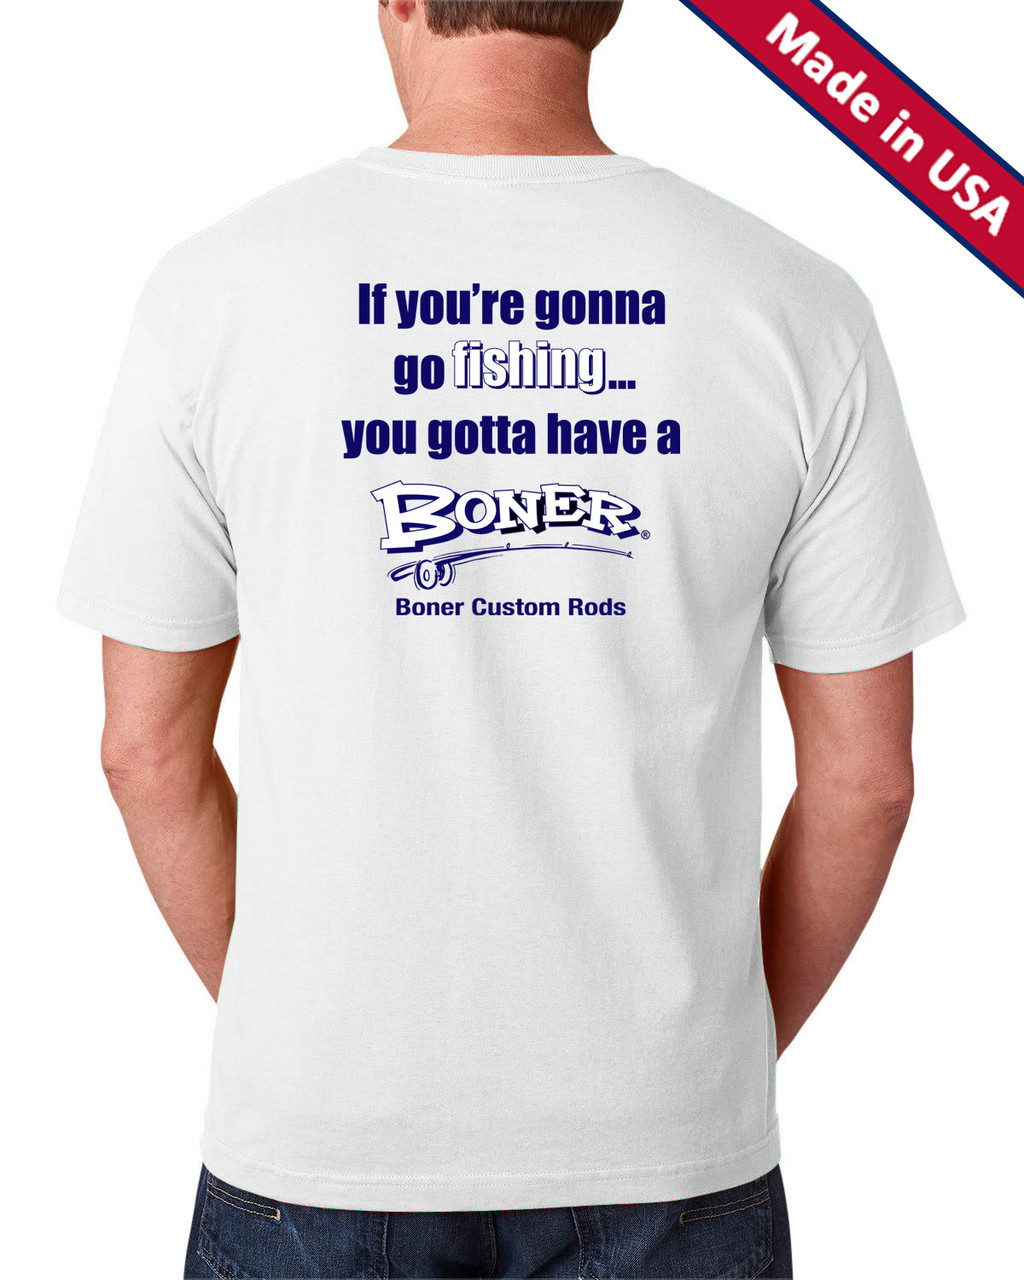 If you’re gonna go fishing…Short Sleeve T-Shirt